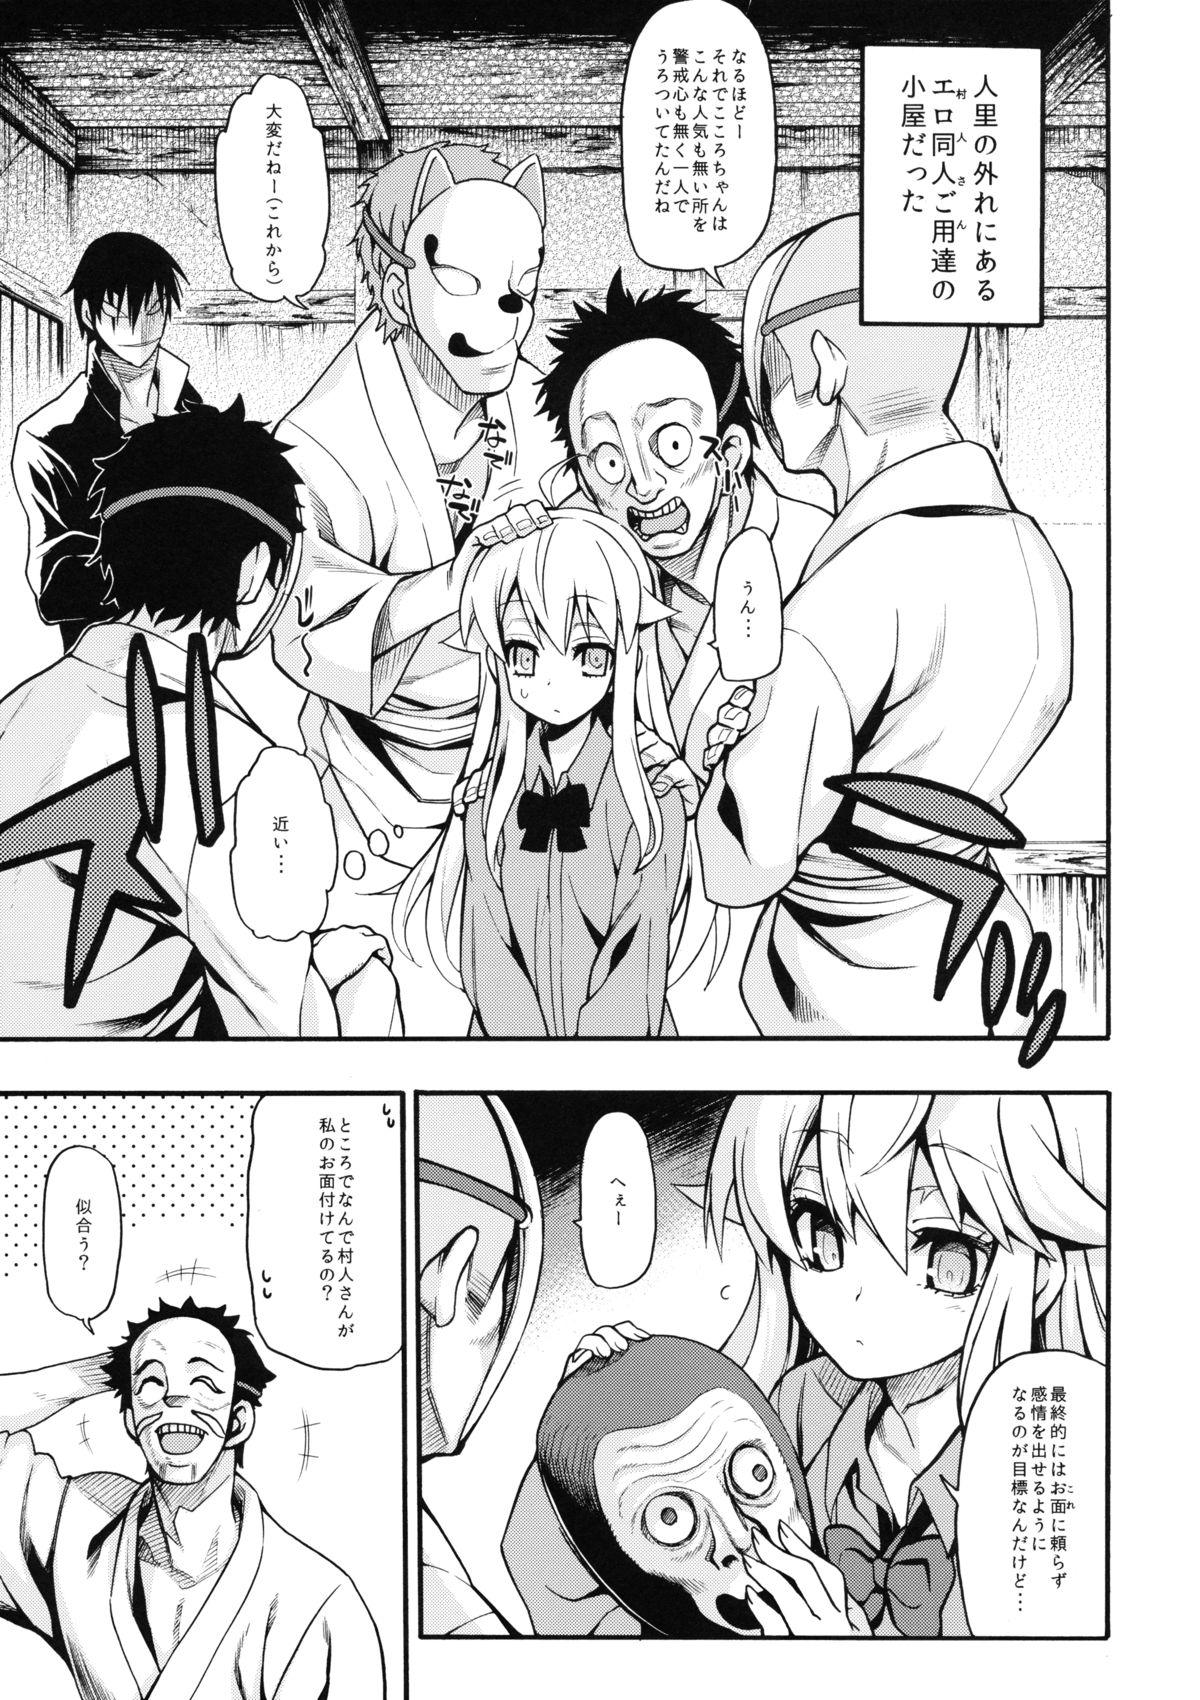 Perfect Porn Hata no Kokoro Connect. - Touhou project Reversecowgirl - Page 4